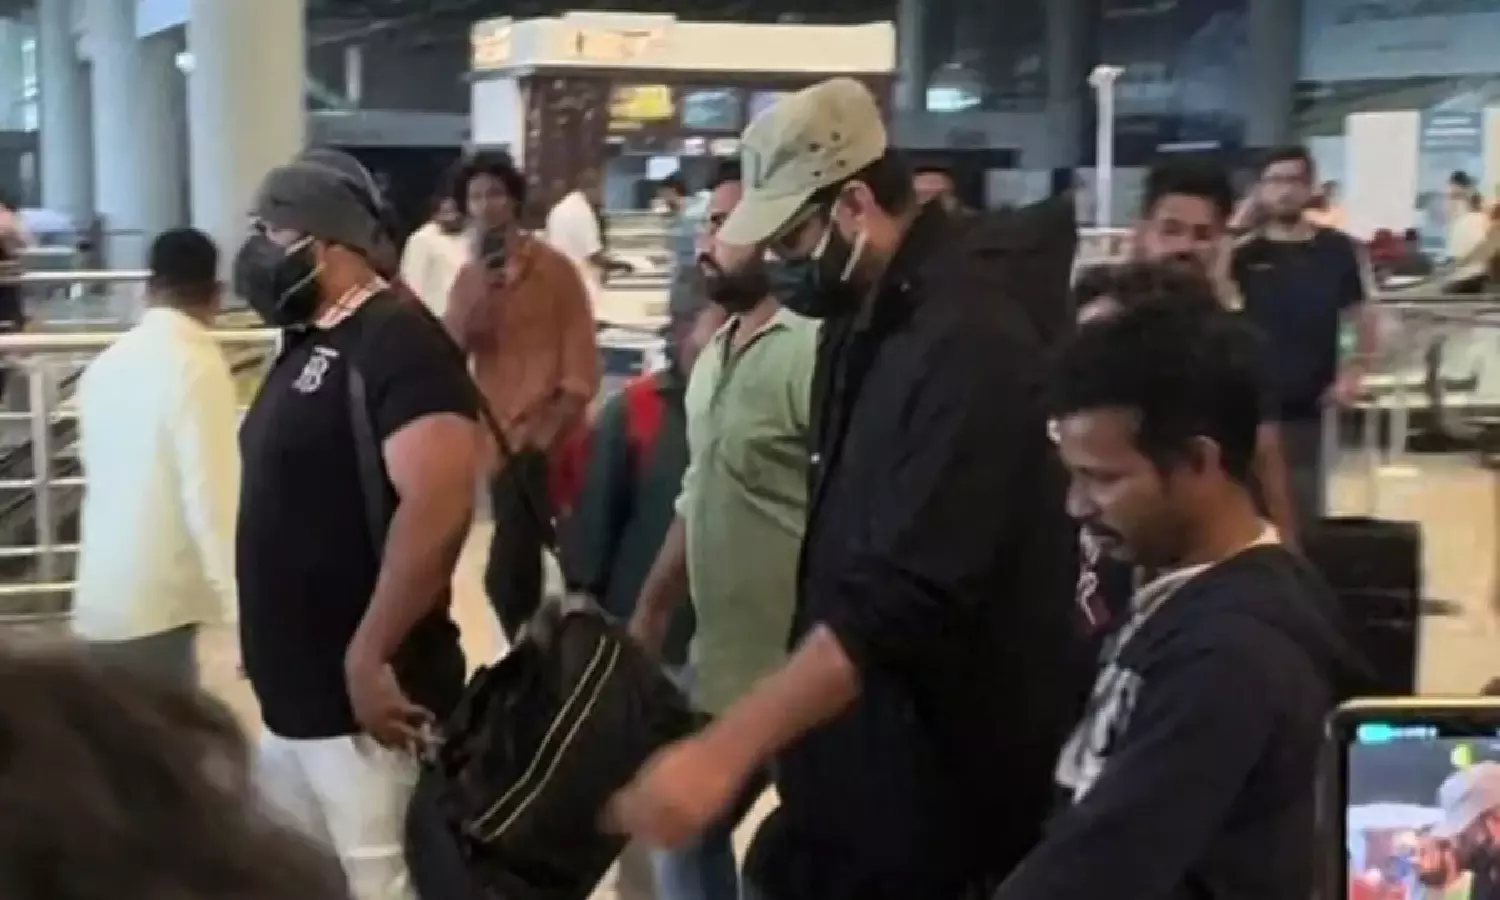 prabhas returned to india after knee surgery